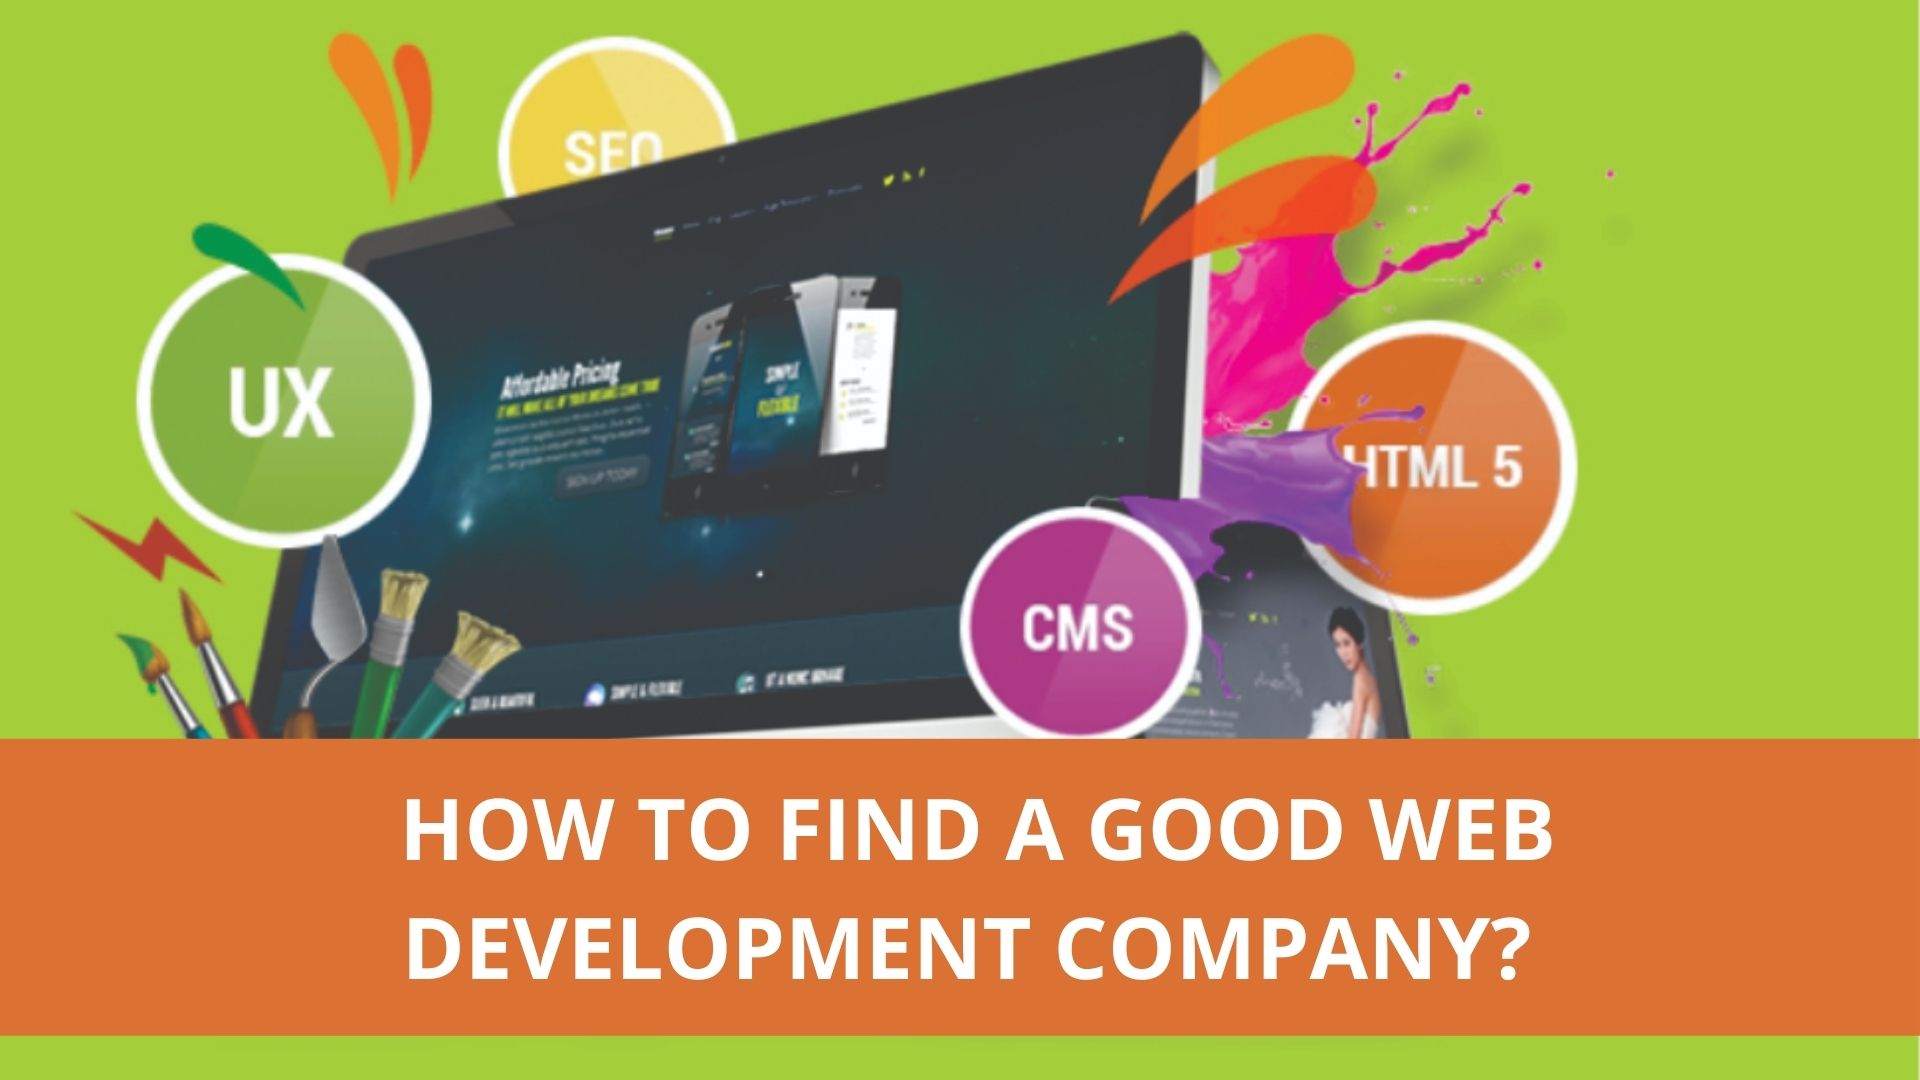 How to find a good web development company